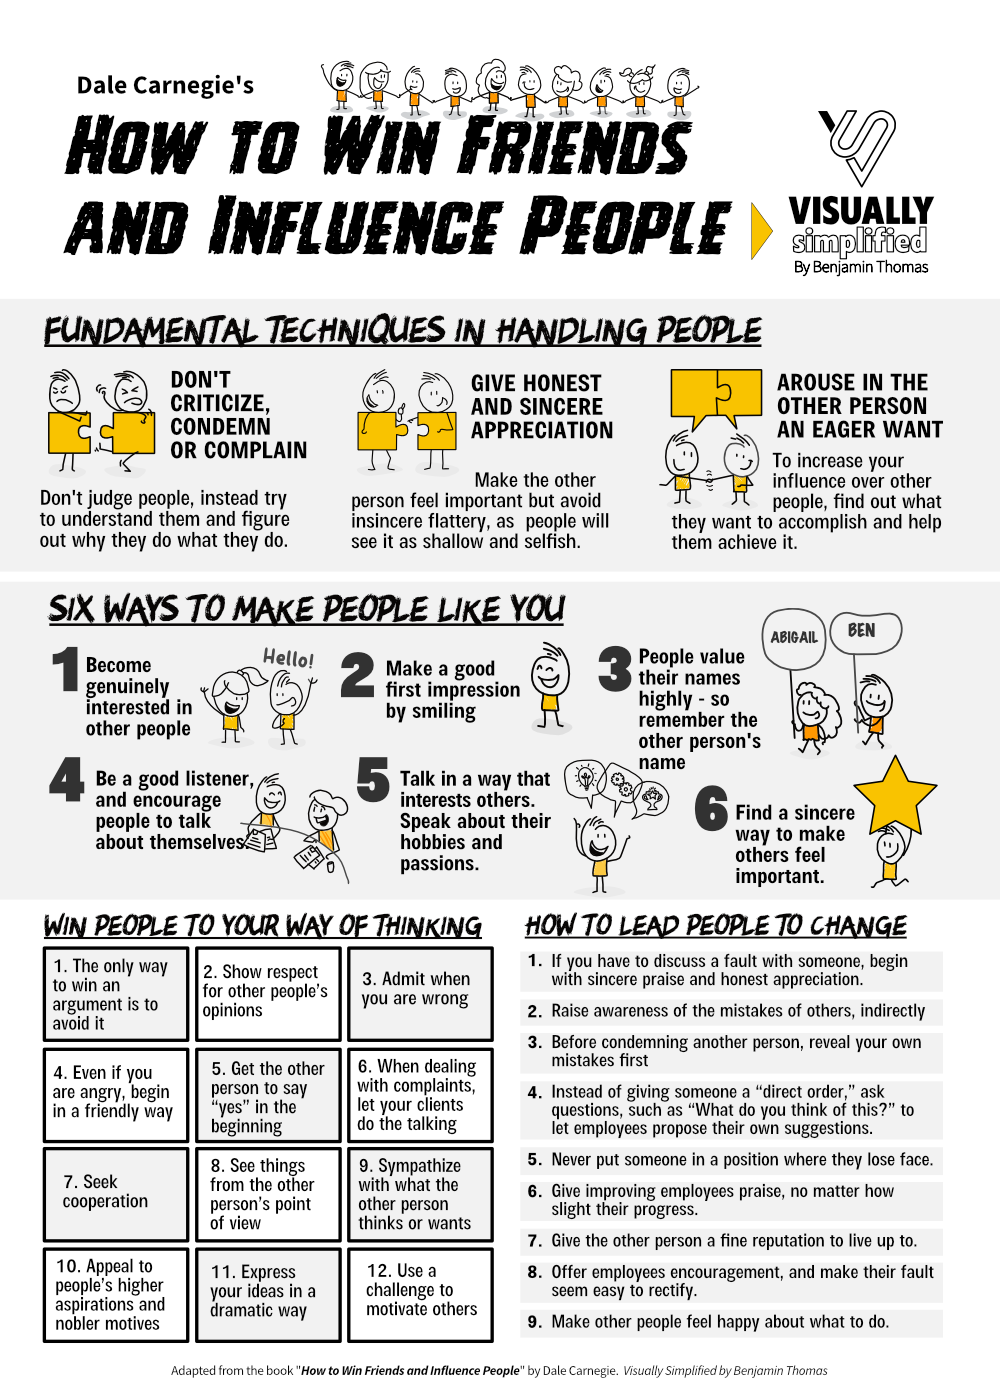 Dale Carnegie's How to Win Friends and Influence People - Visually Simplified by Benjamin Thomas